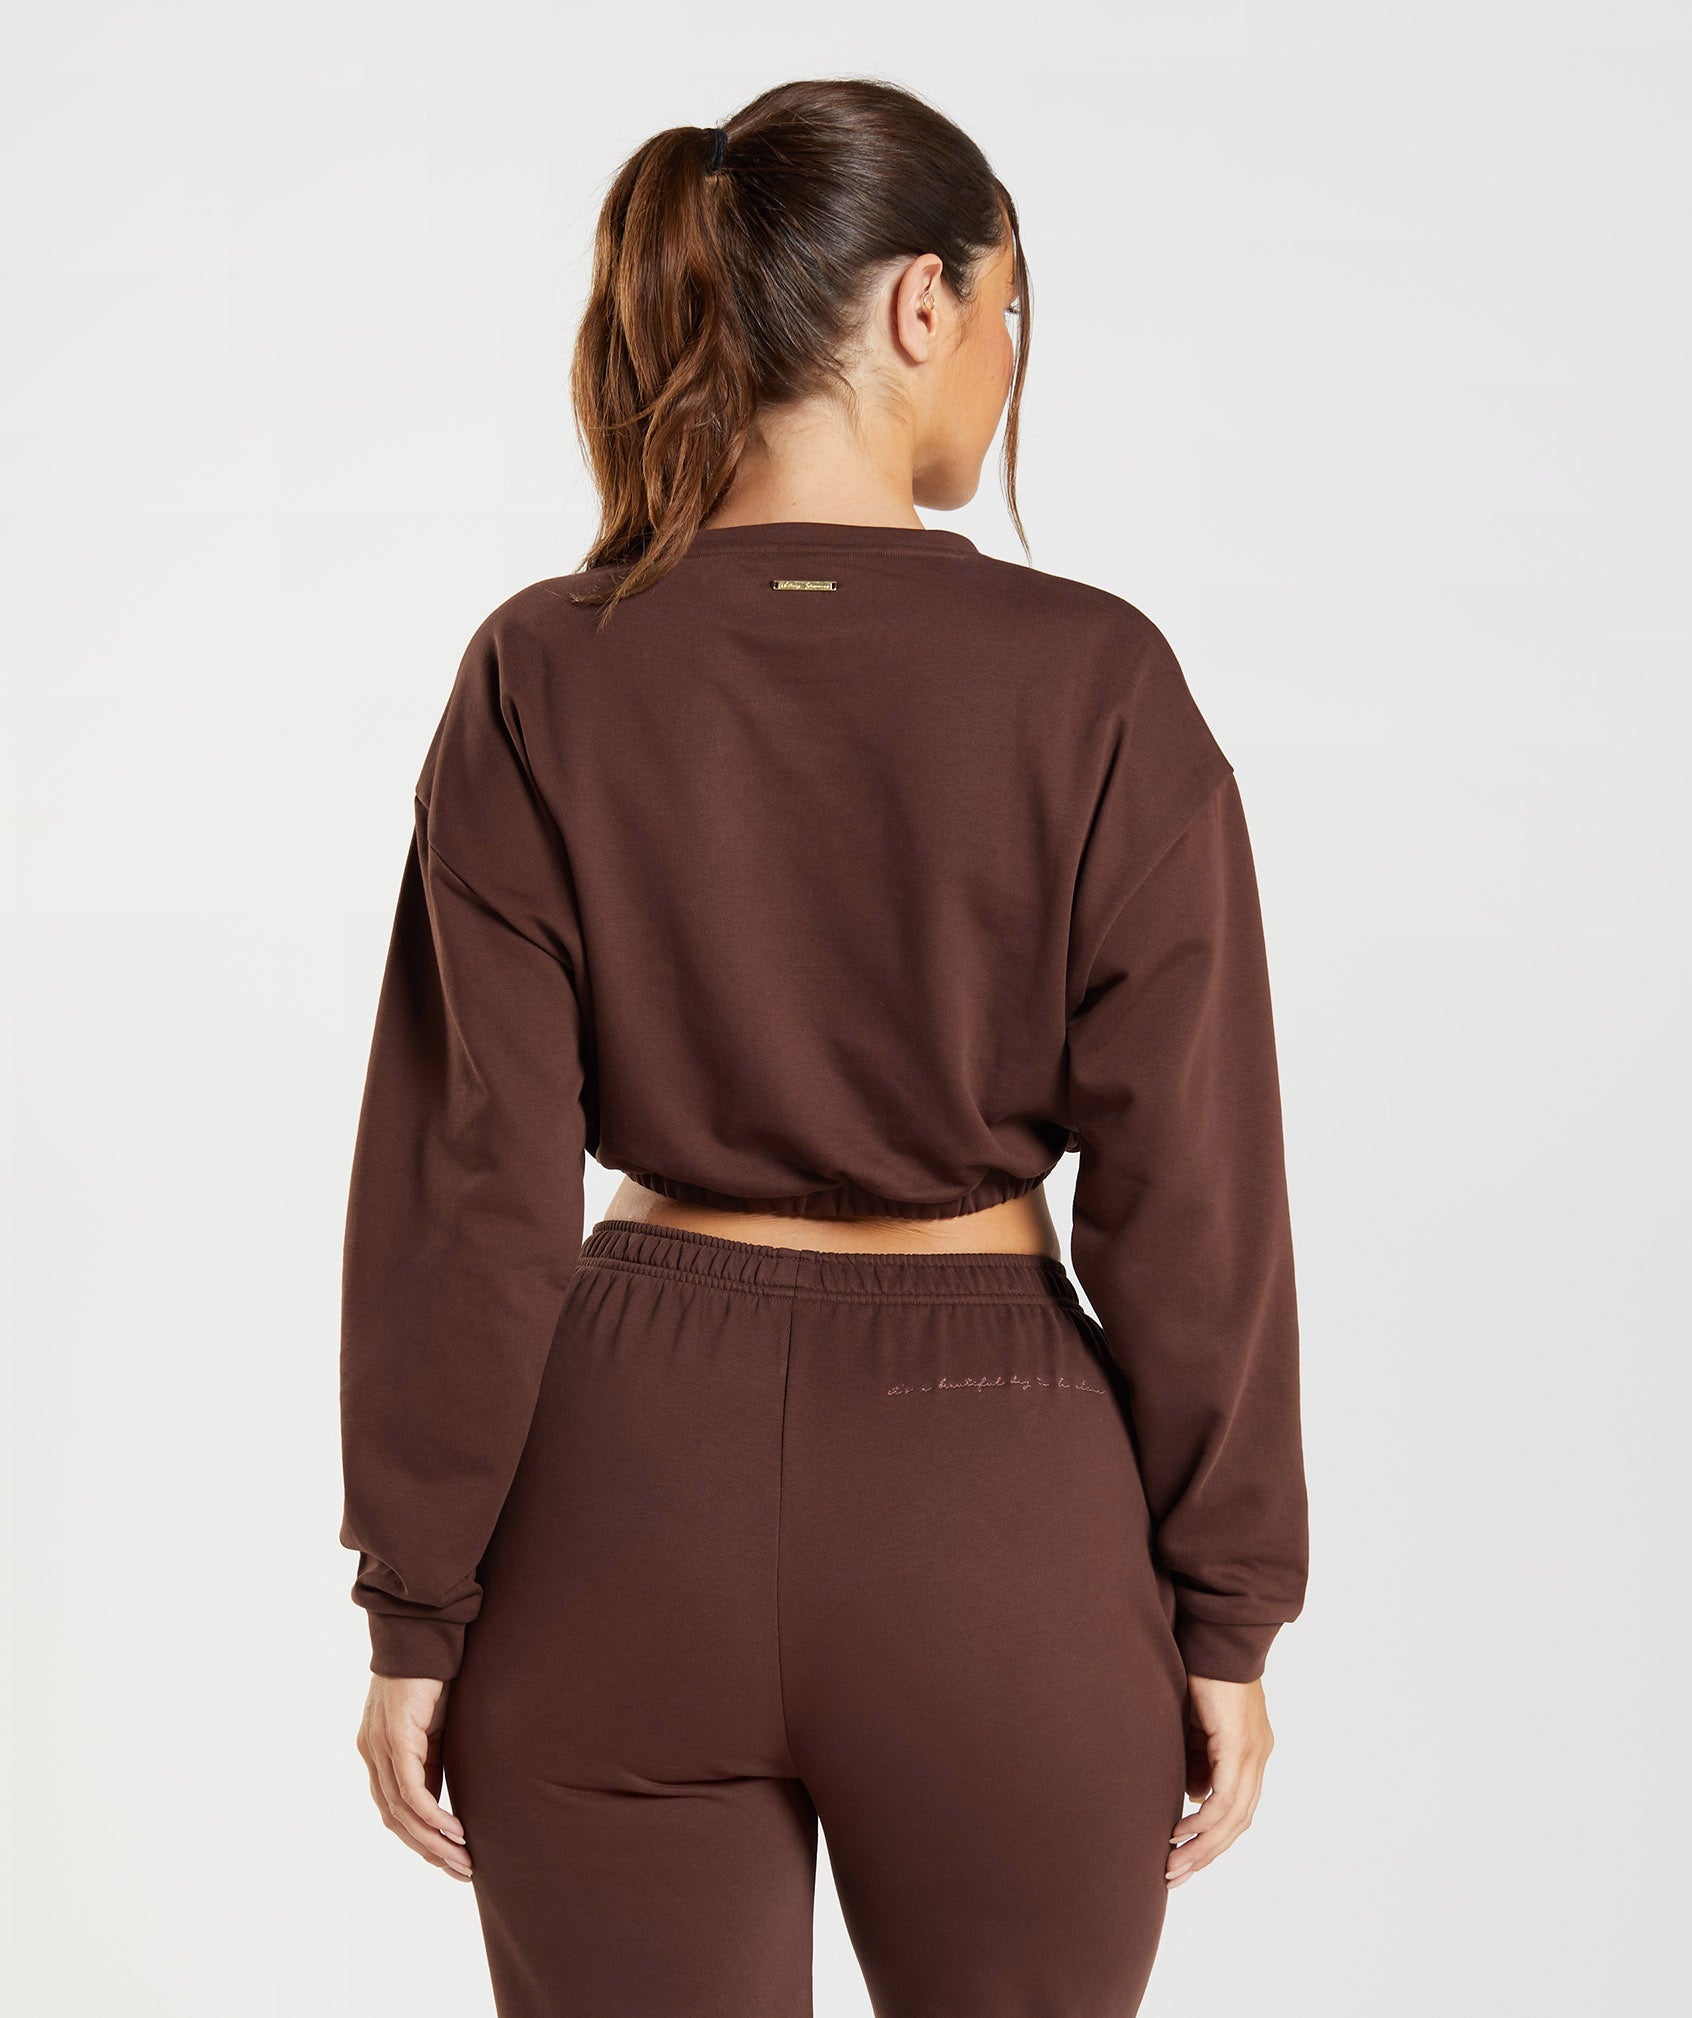 Whitney Cropped Pullover in Rekindle Brown - view 4